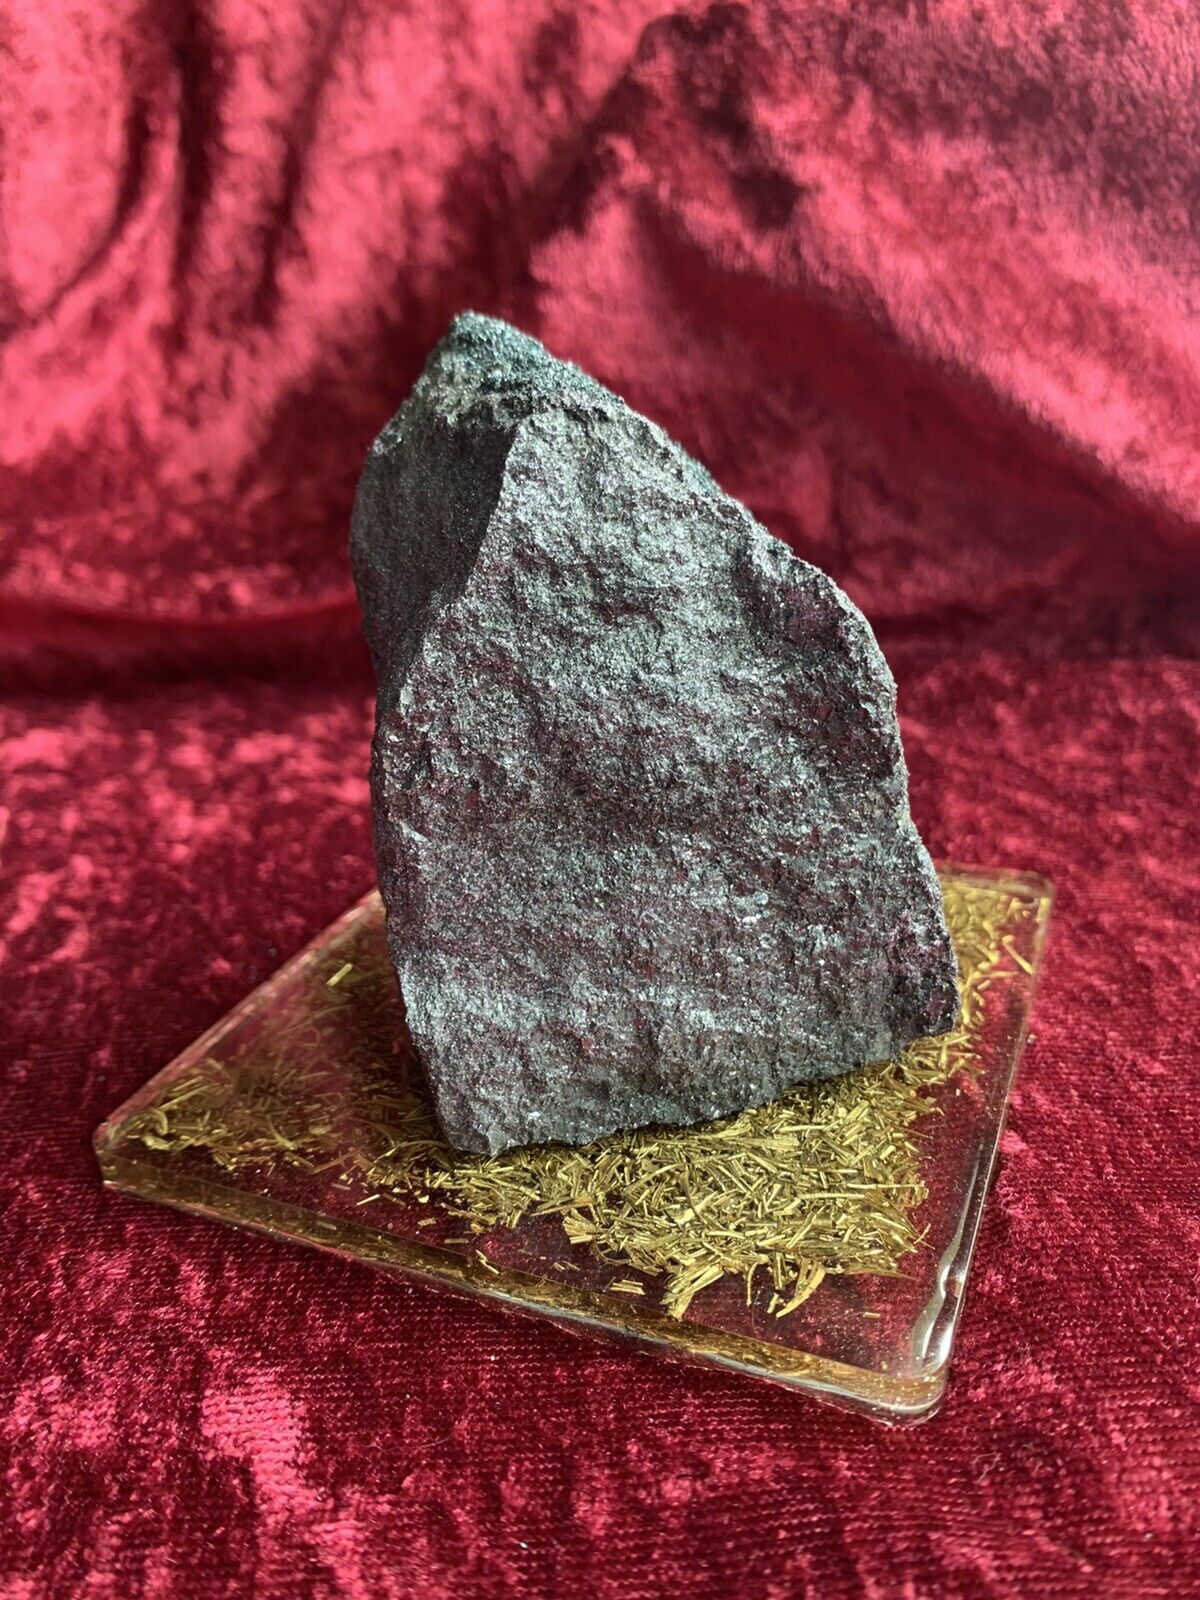 Genuine Live Magnetic Lodestone 1.62 lb Mined in New York Adirondack Mountains